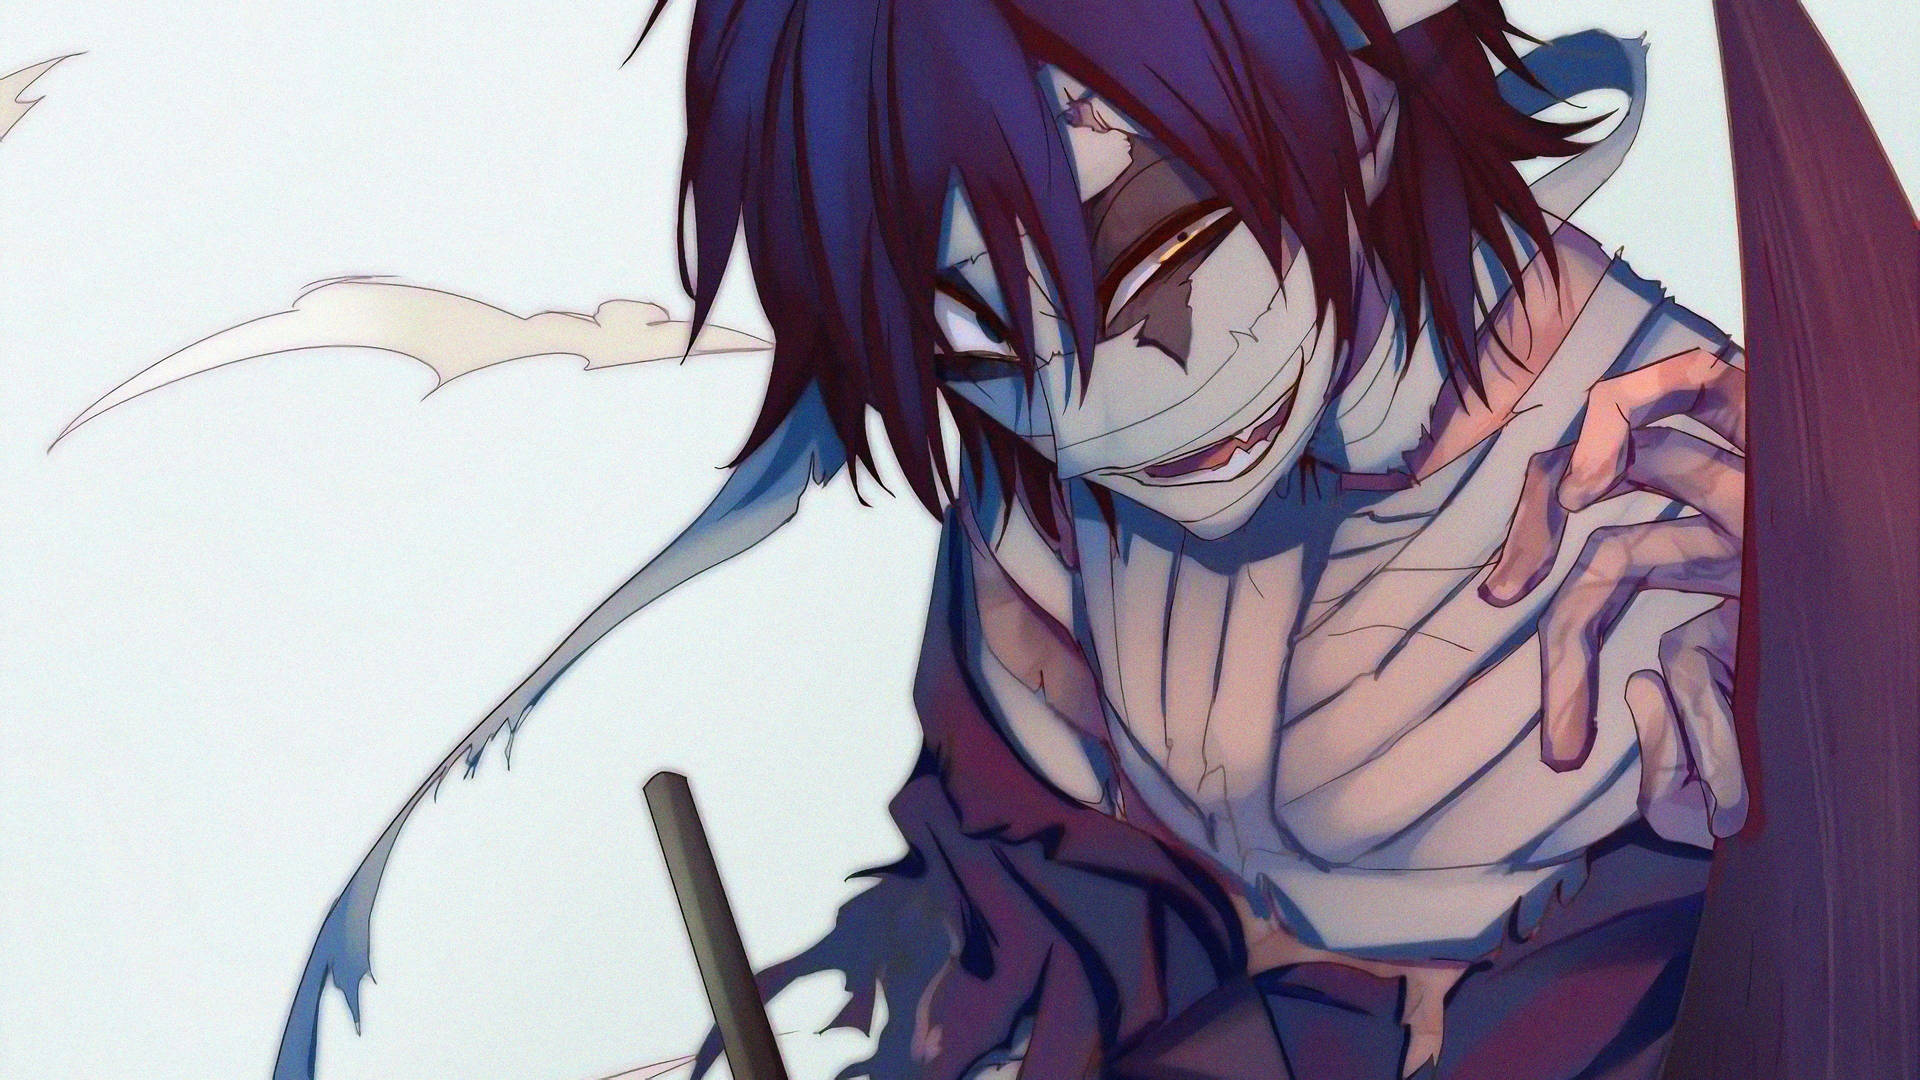 Smiling Zack Of Angels Of Death Wallpaper